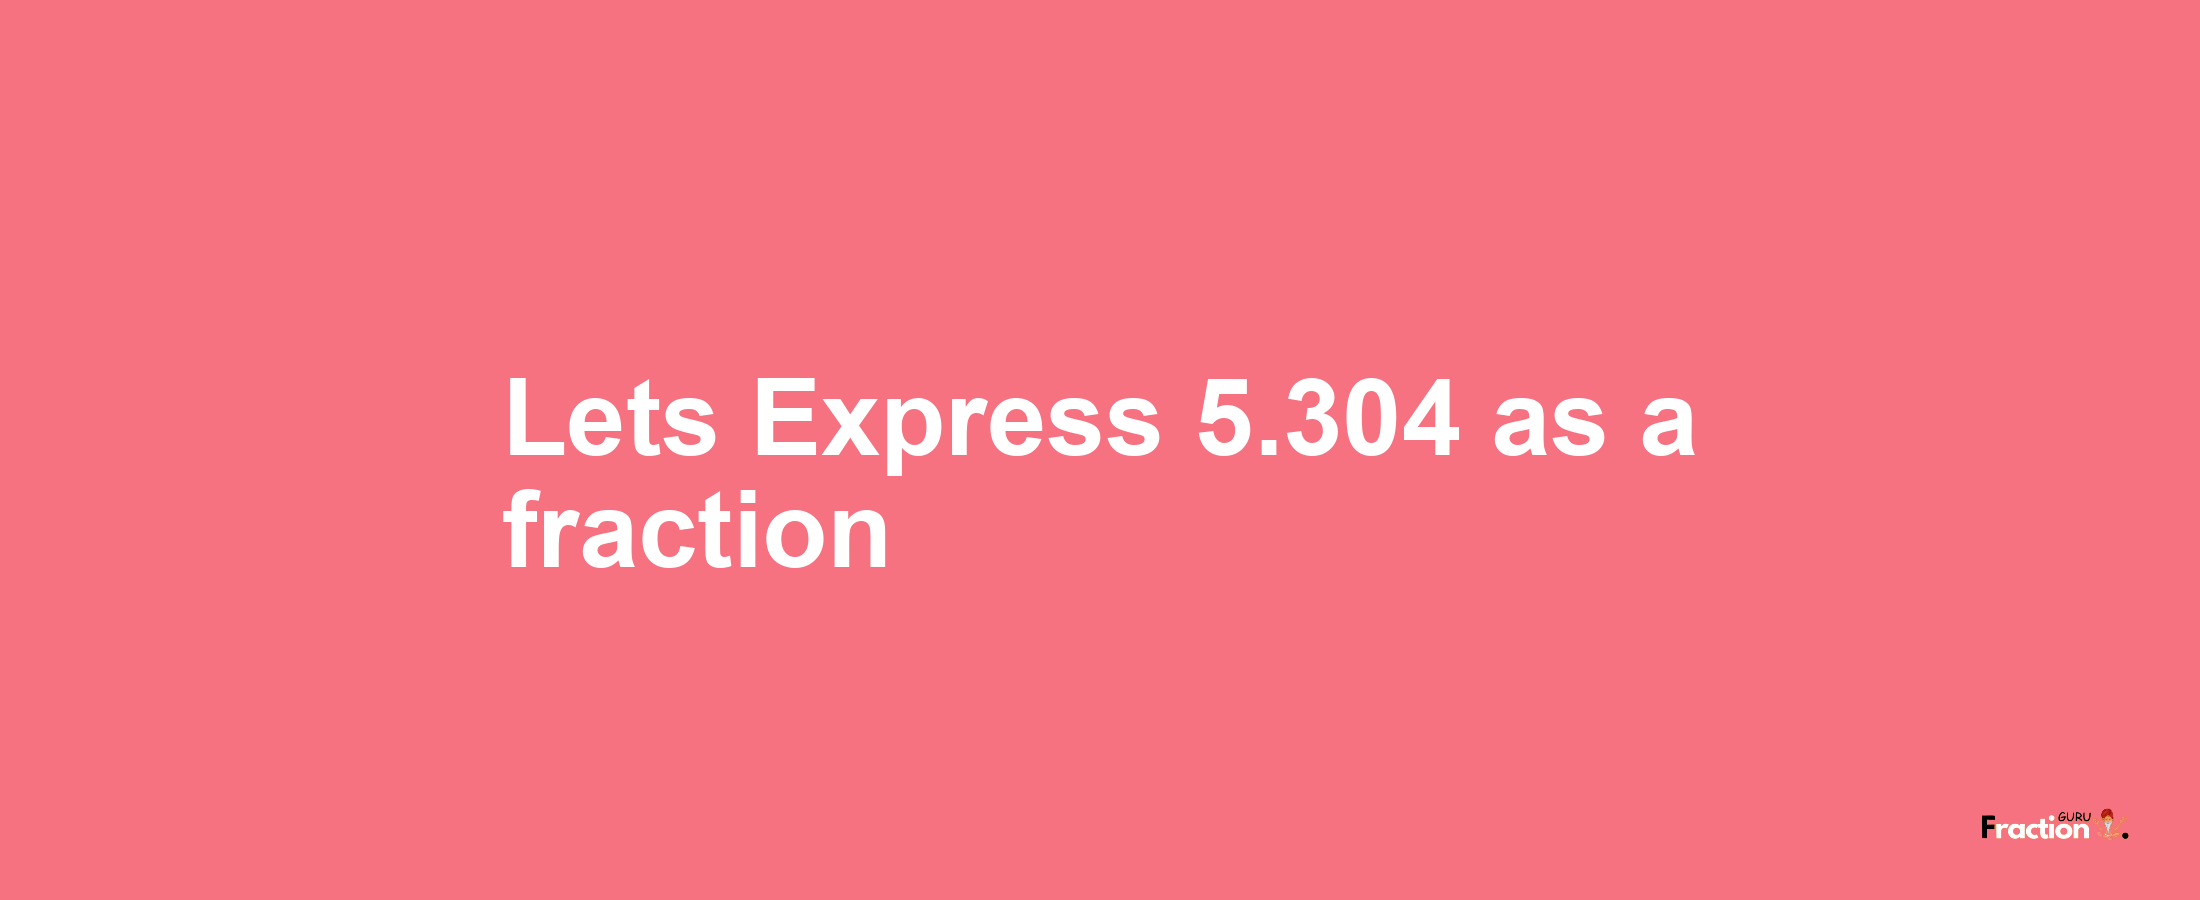 Lets Express 5.304 as afraction